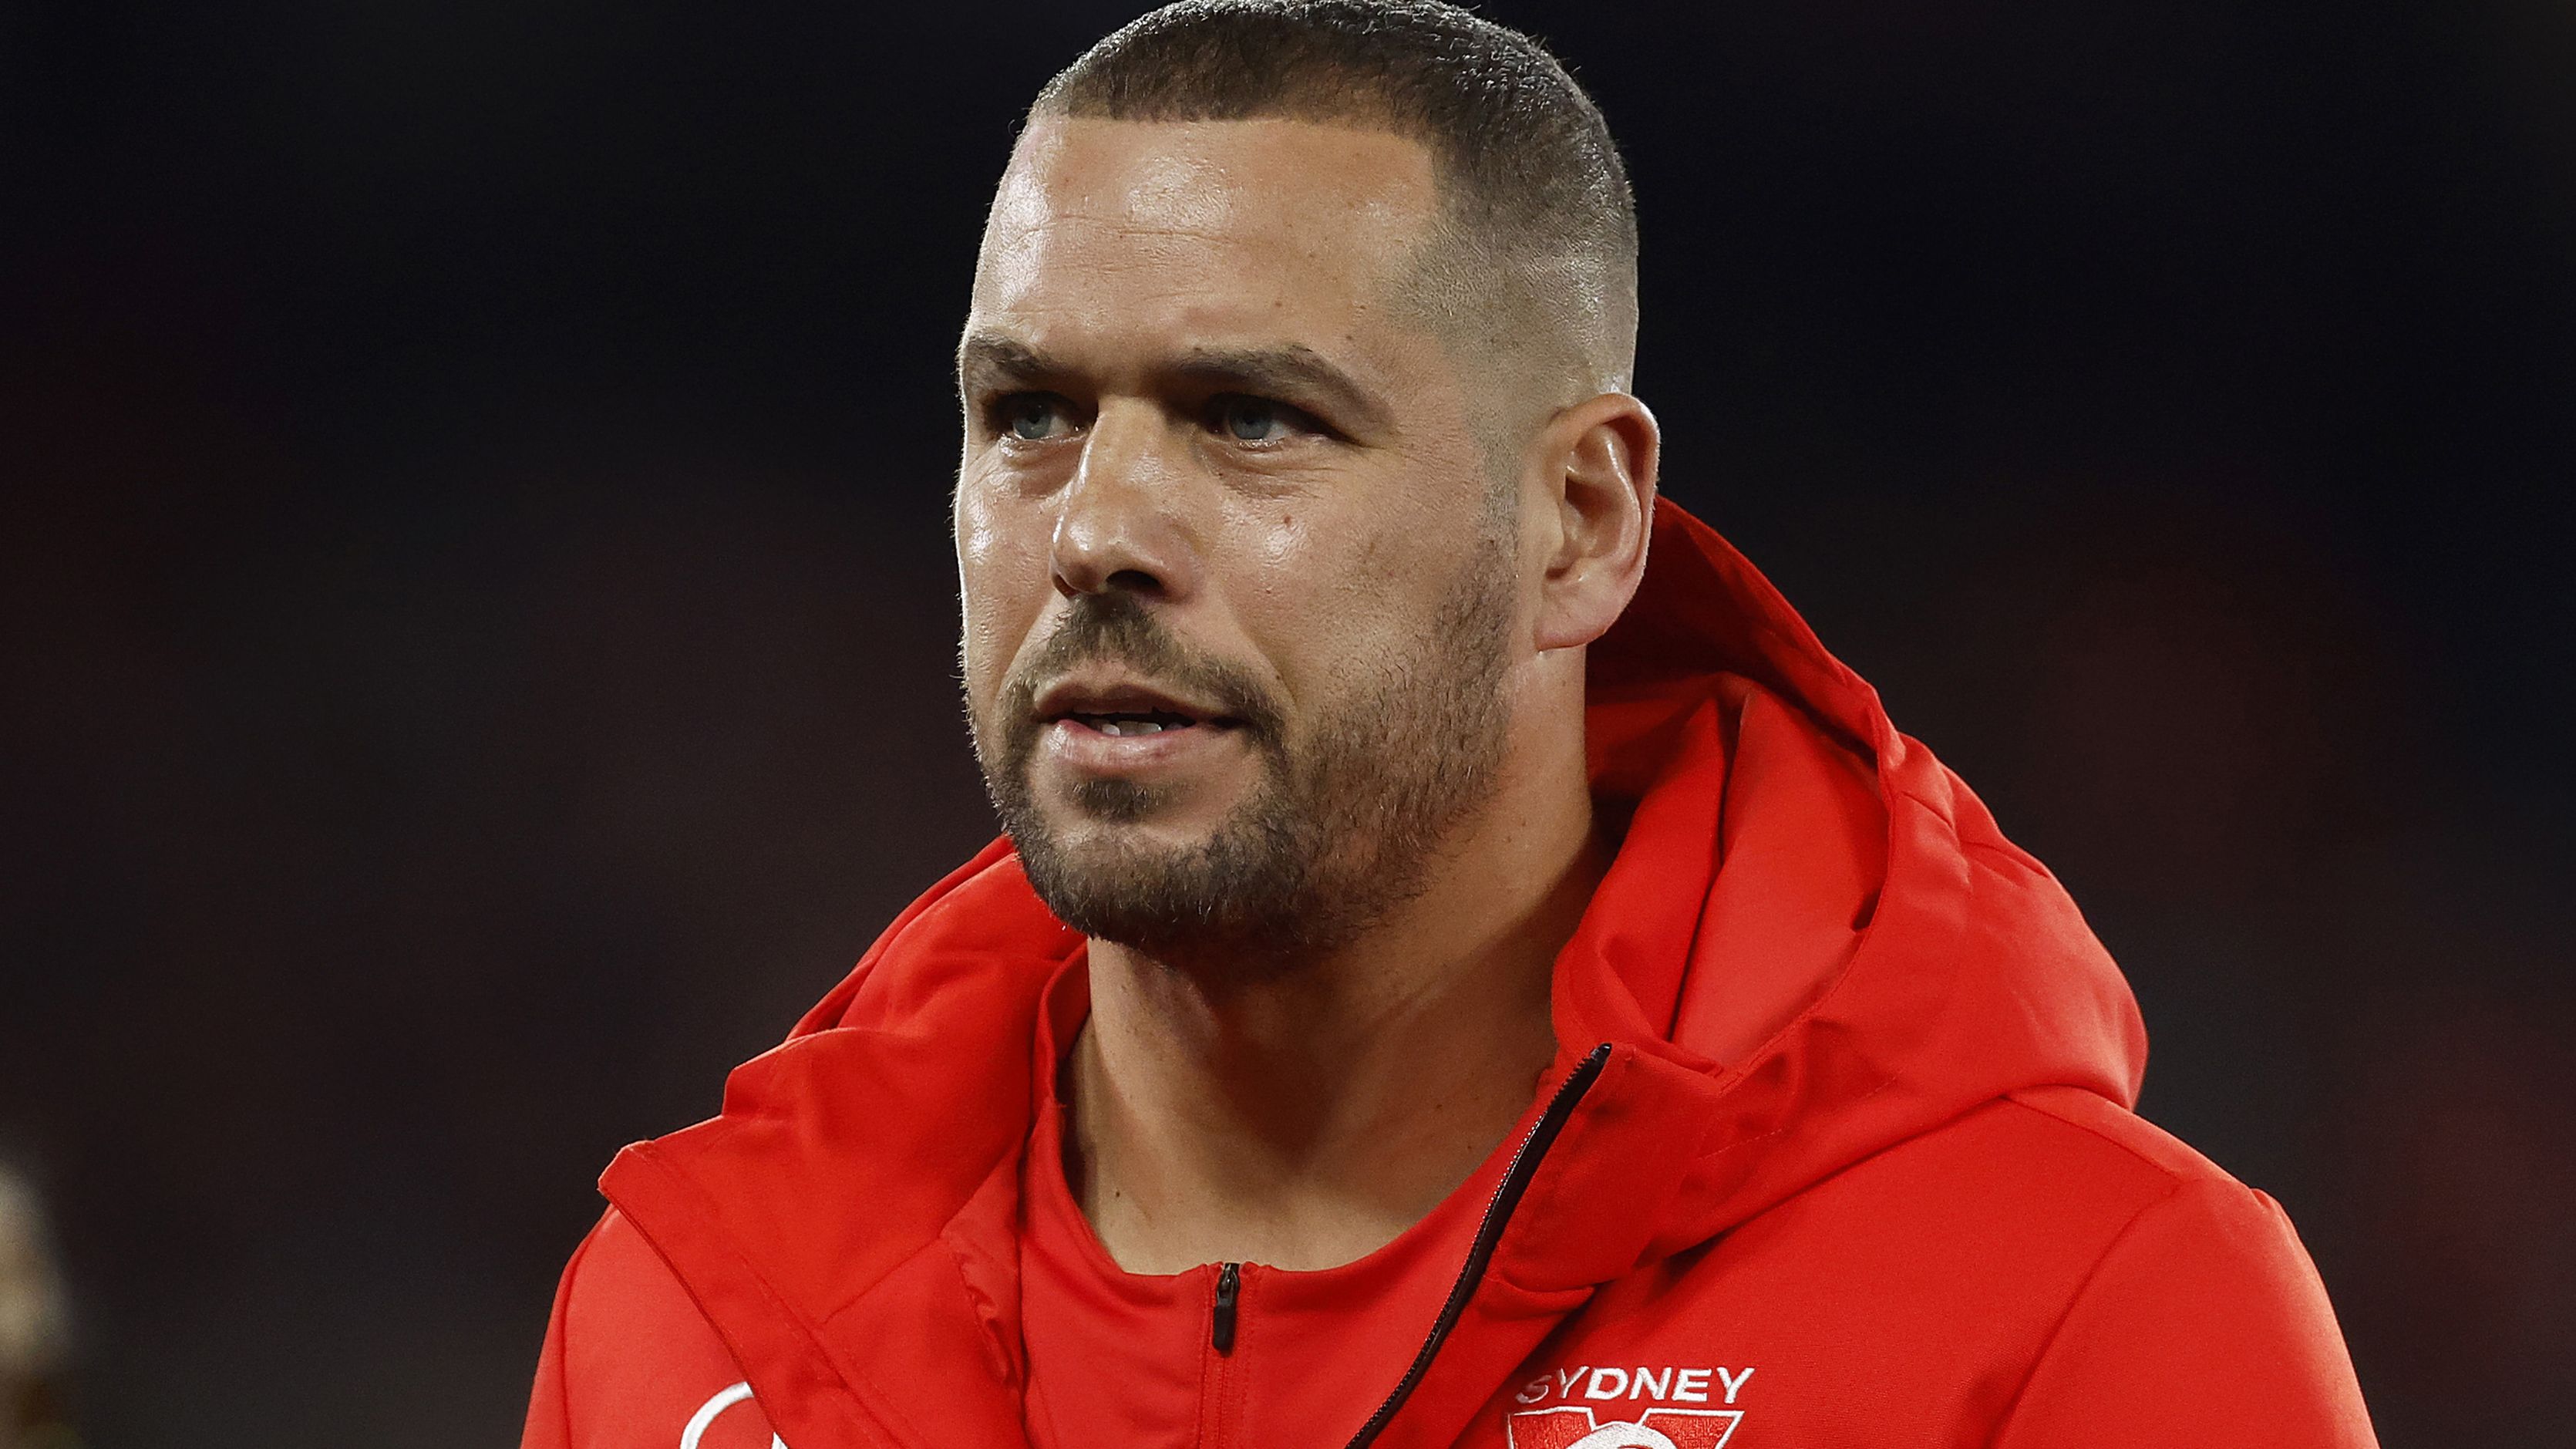 Kane Cornes delivers cold truth to Lance Franklin after 'far-fetched' retirement backflip consideration